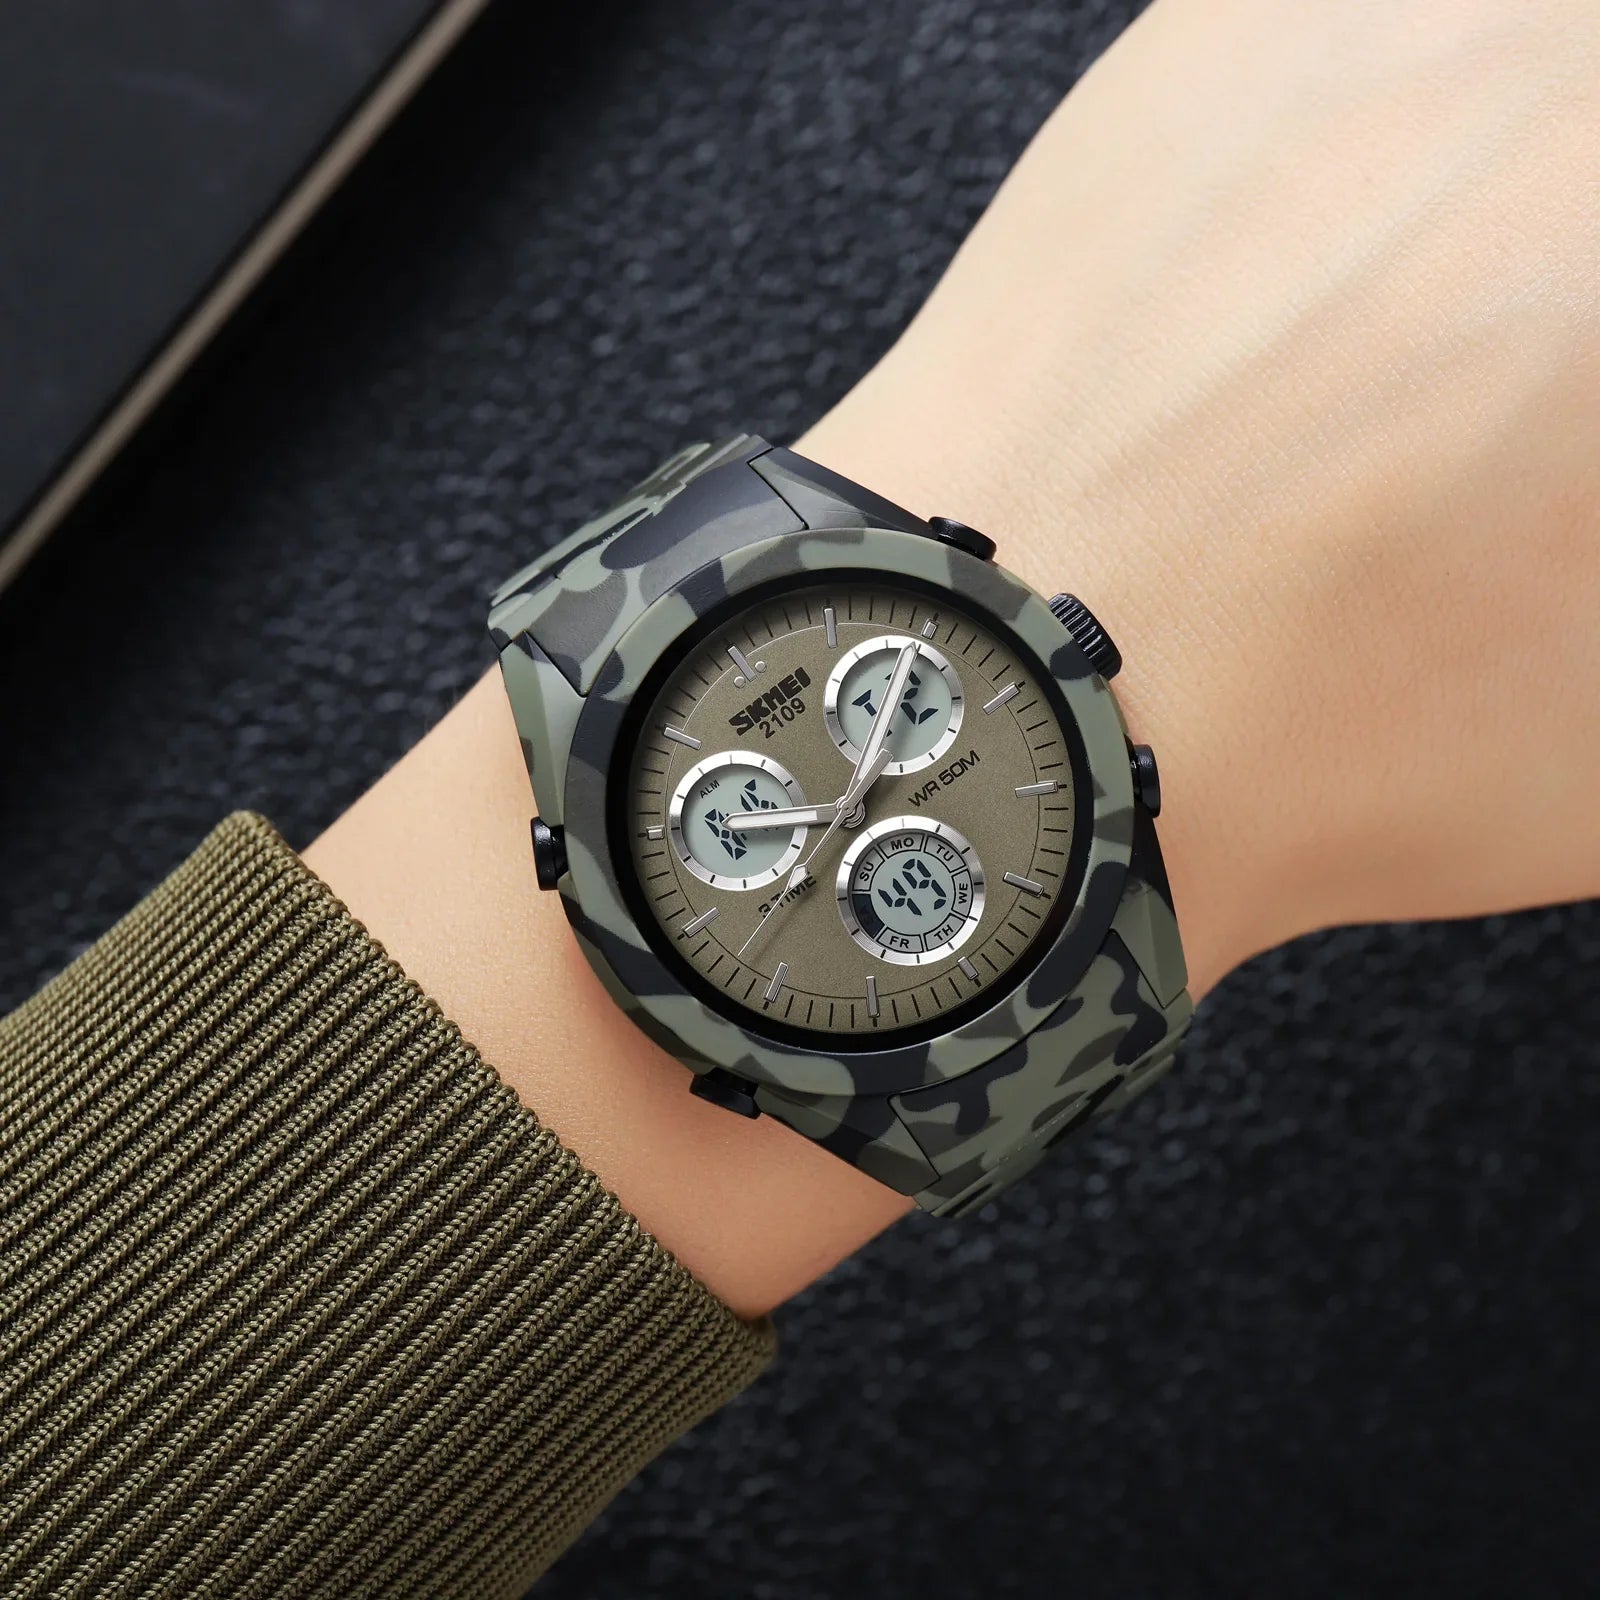 SKMEI Multifunctional 3 Time Military Camouflage Countdown